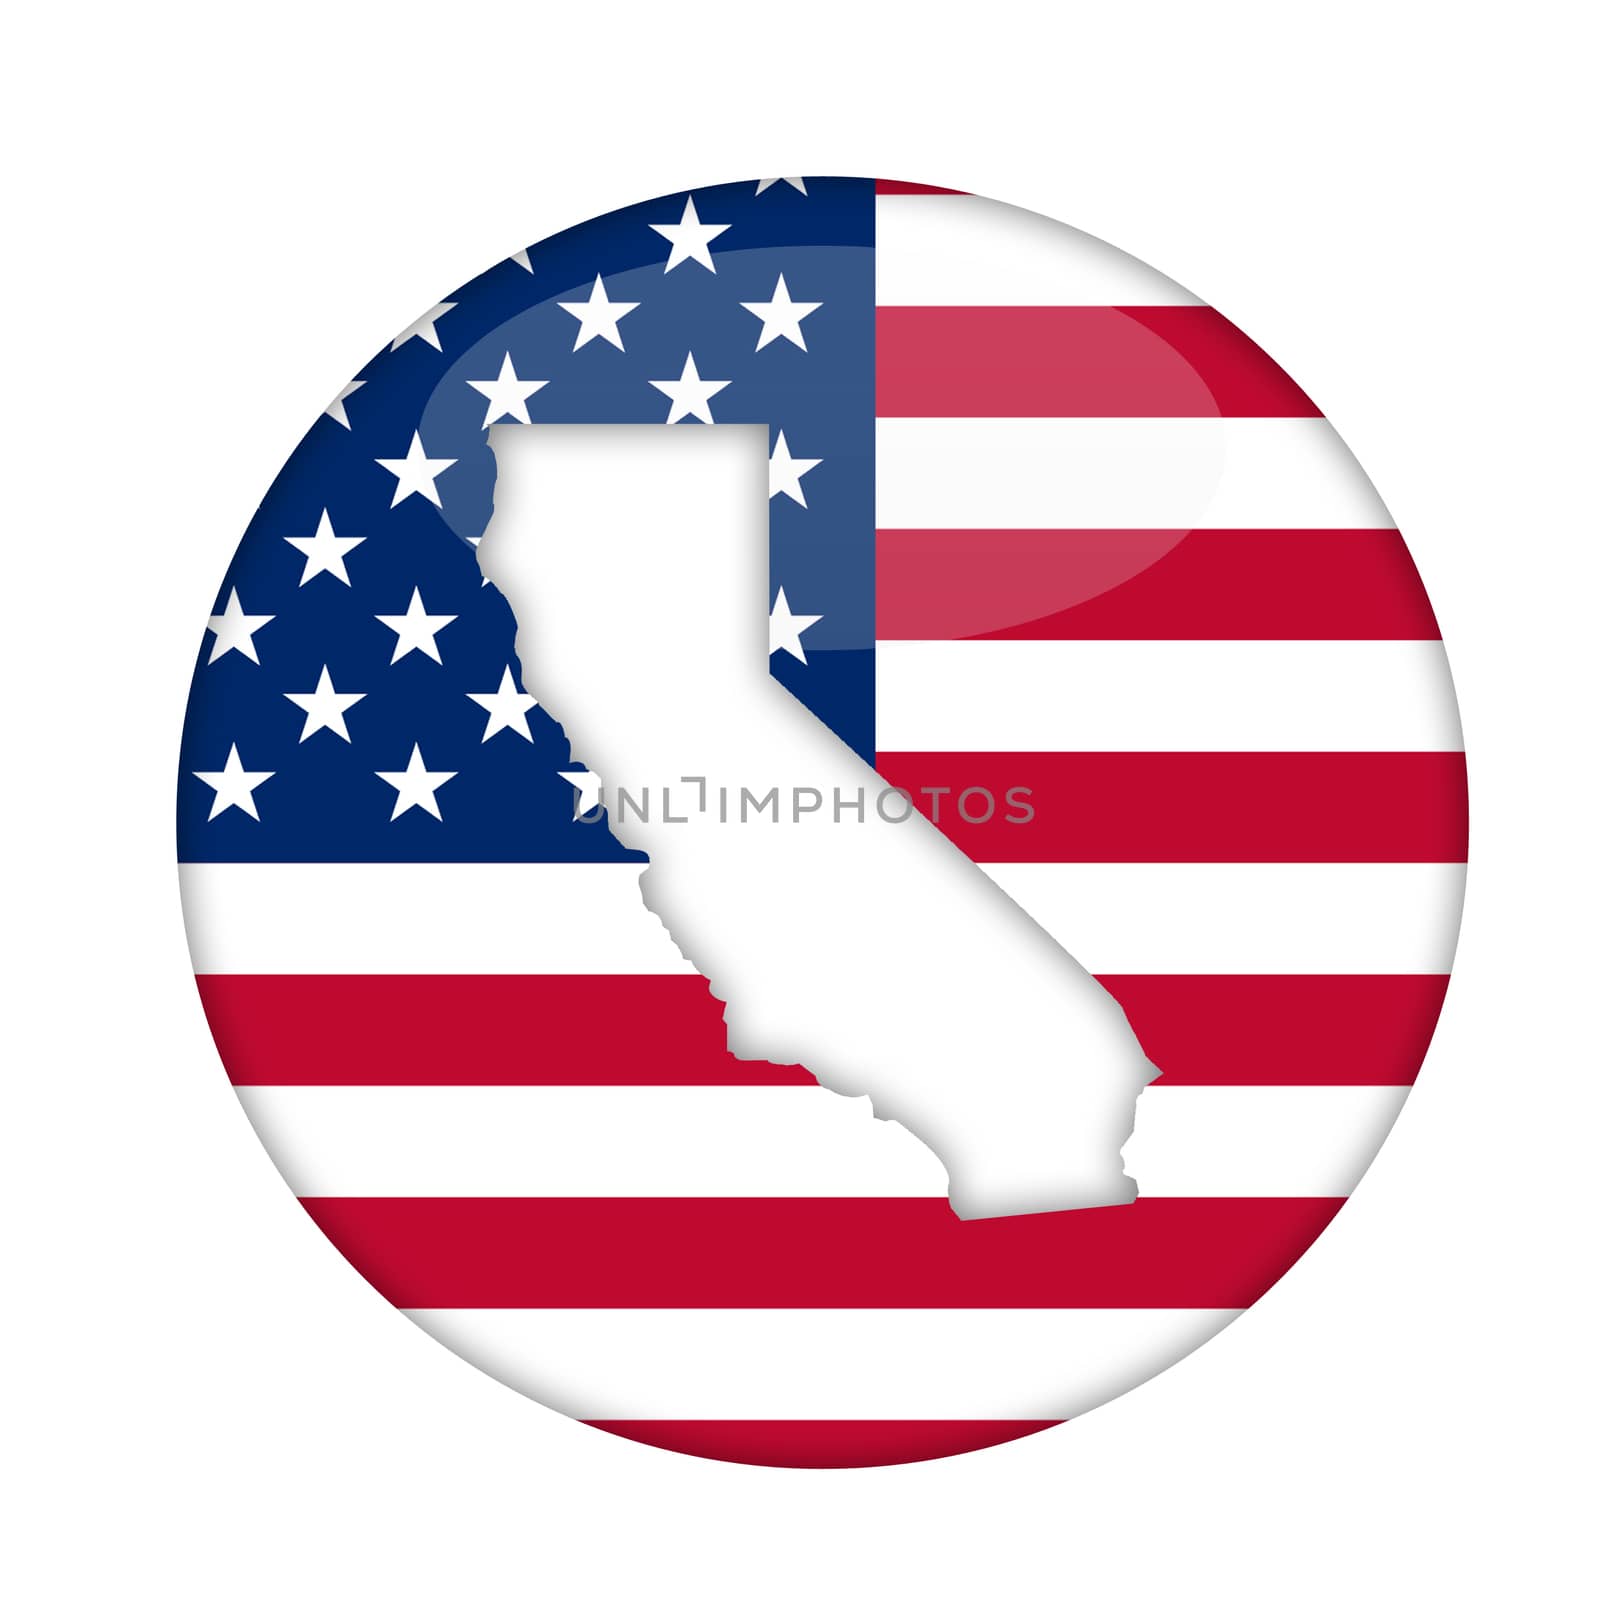 California state of America badge isolated on a white background.